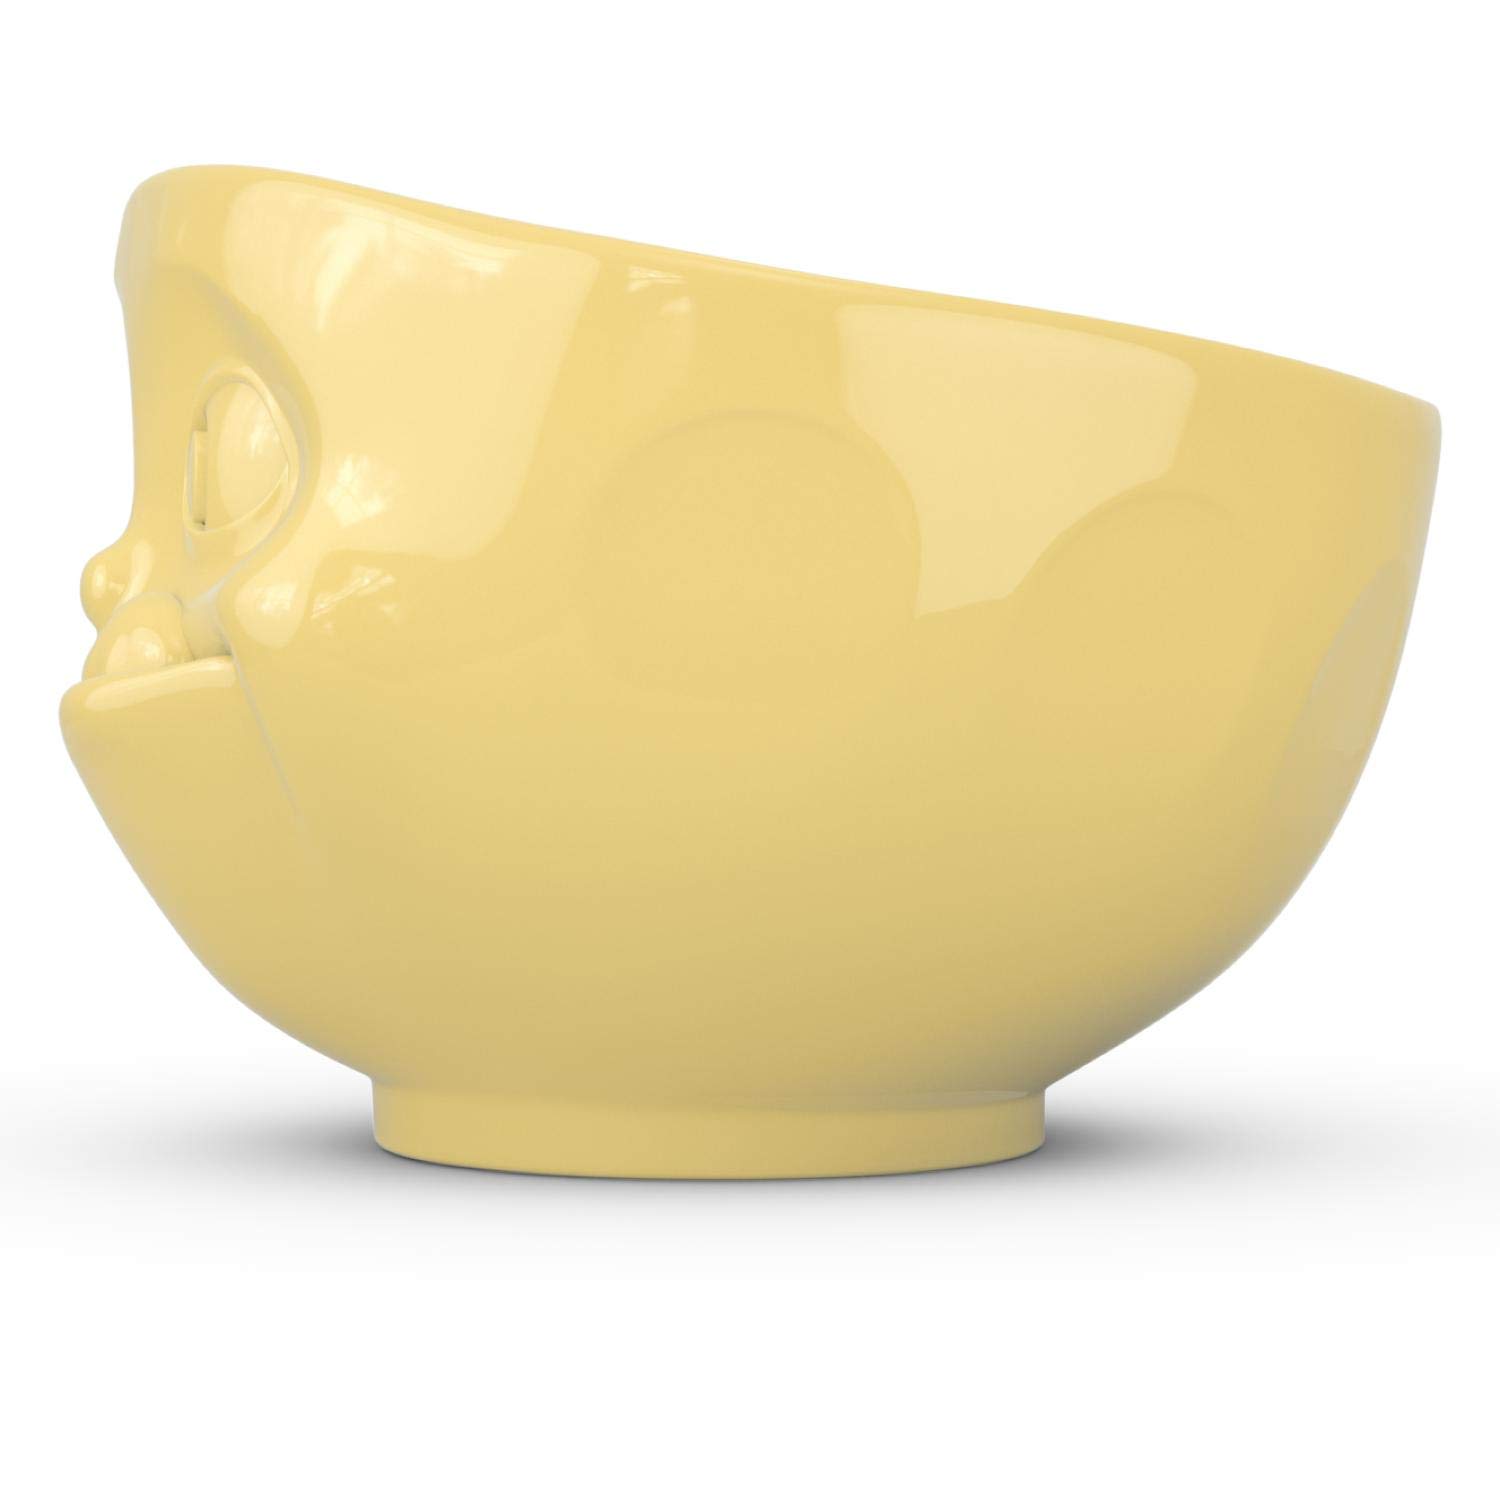 FIFTYEIGHT PRODUCTS TASSEN Porcelain Bowl, Tasty Face Edition, 16 oz. Yellow, (Single Bowl) for Serving Cereal, Soup